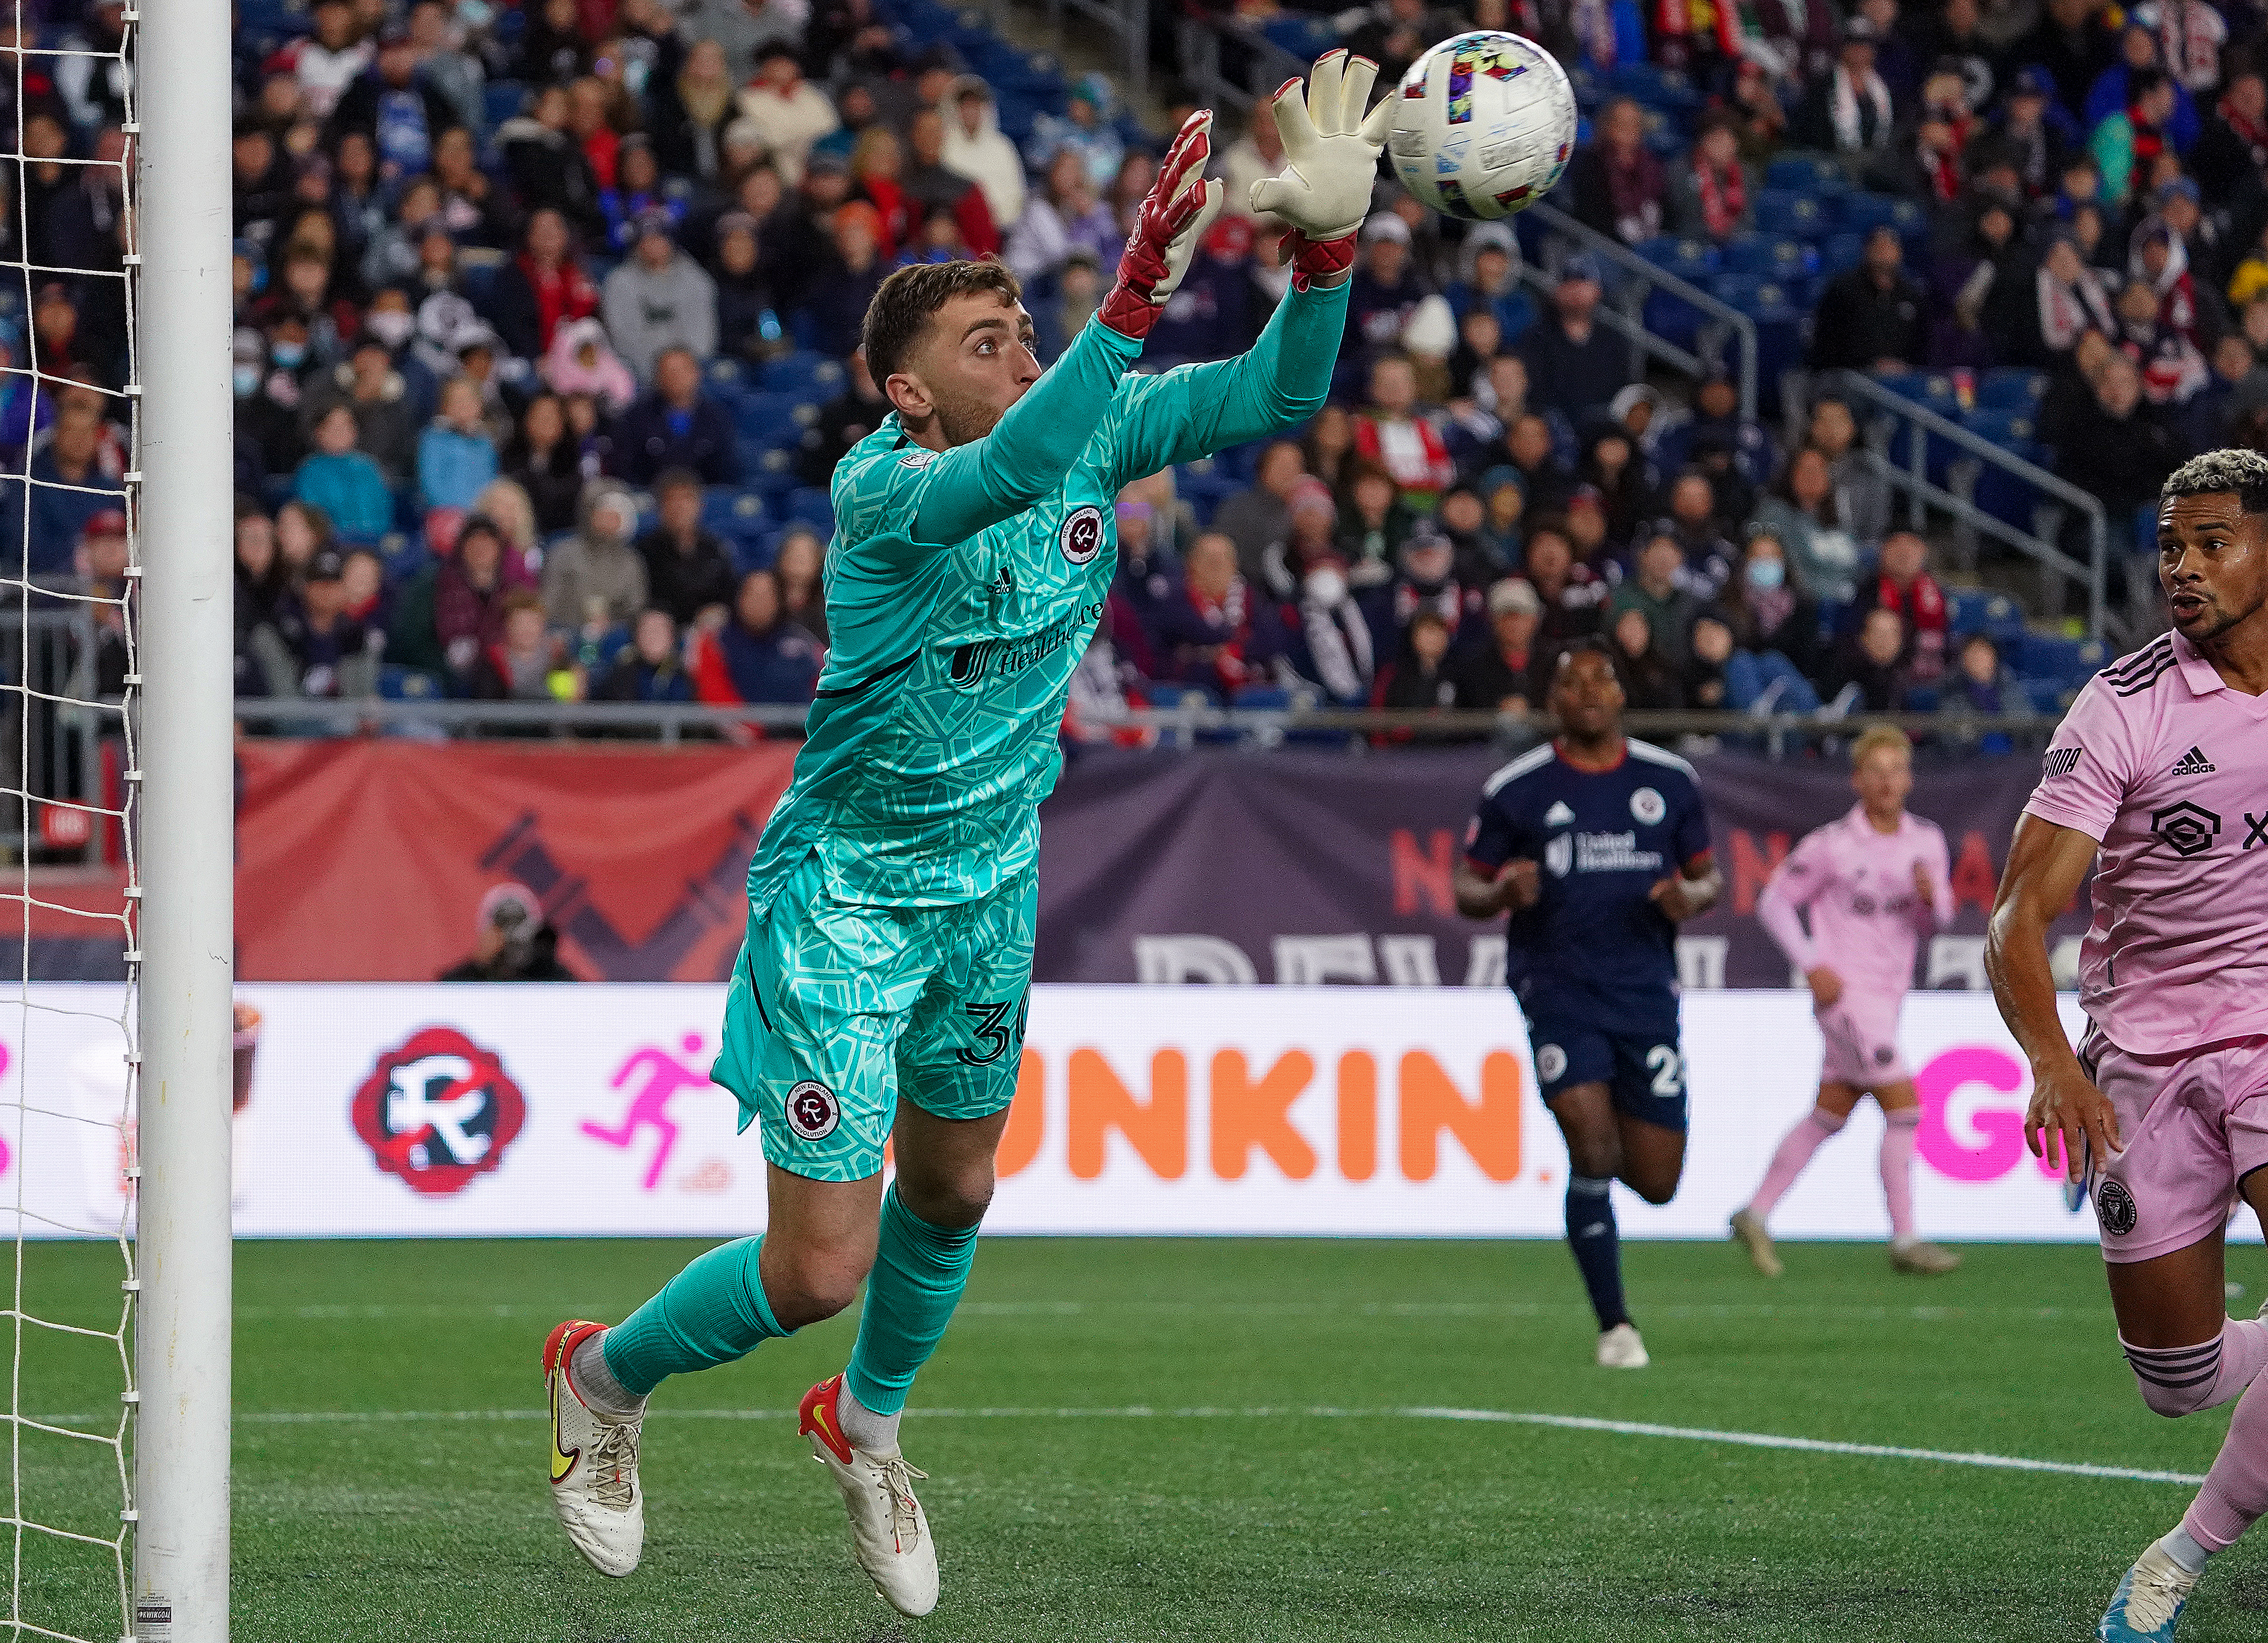 A chance discovery connects US soccer star Matt Turner to his